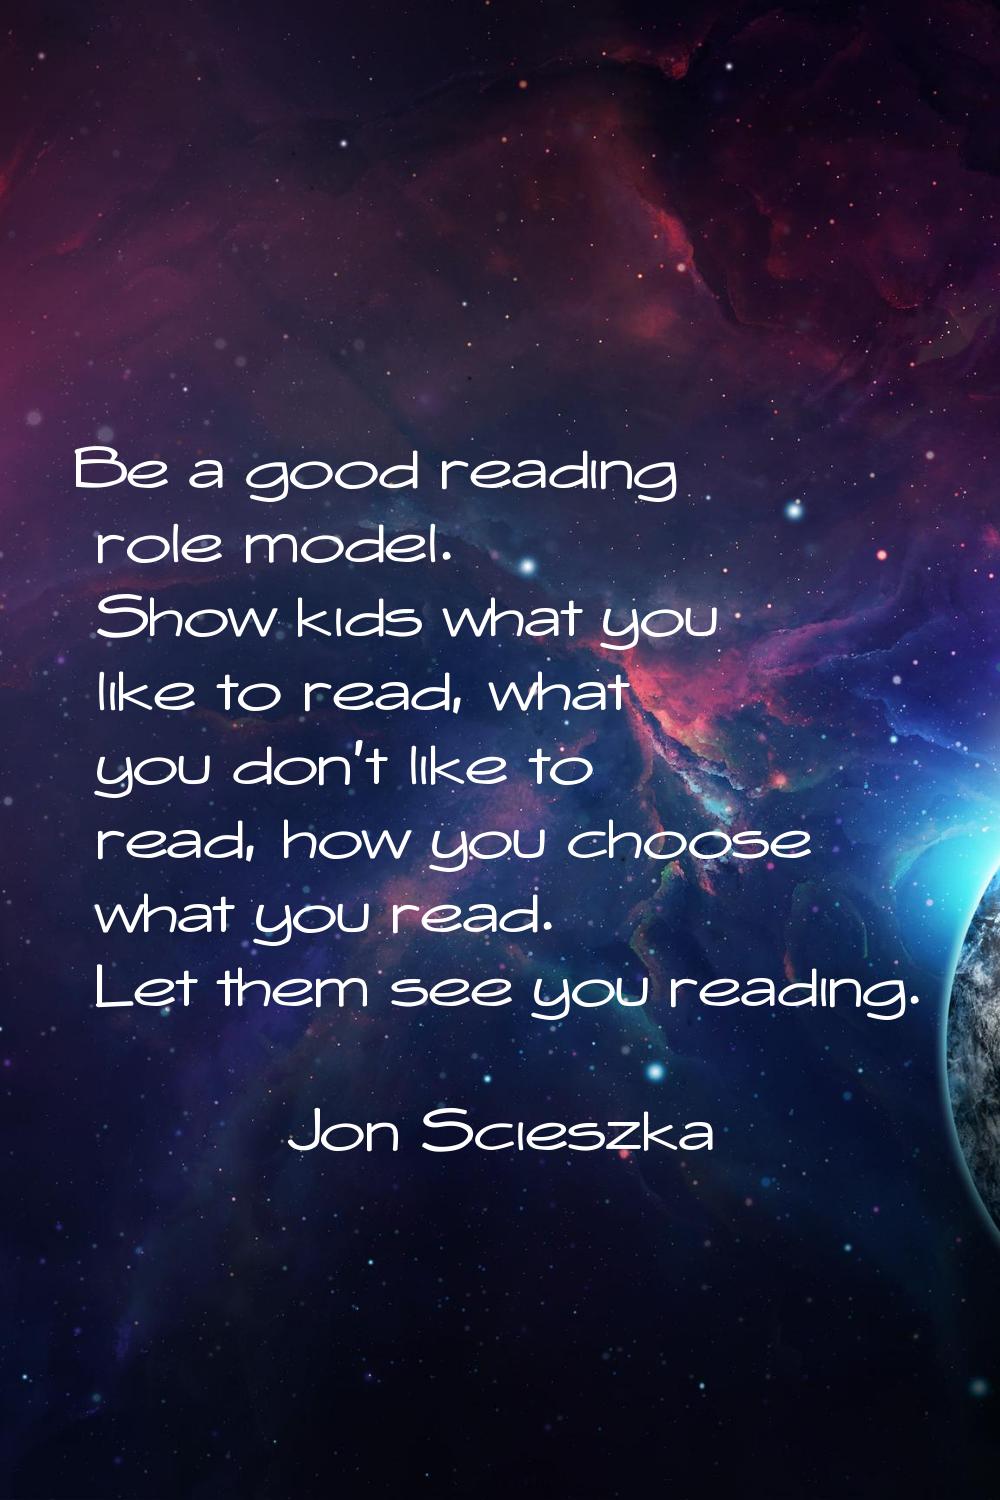 Be a good reading role model. Show kids what you like to read, what you don't like to read, how you